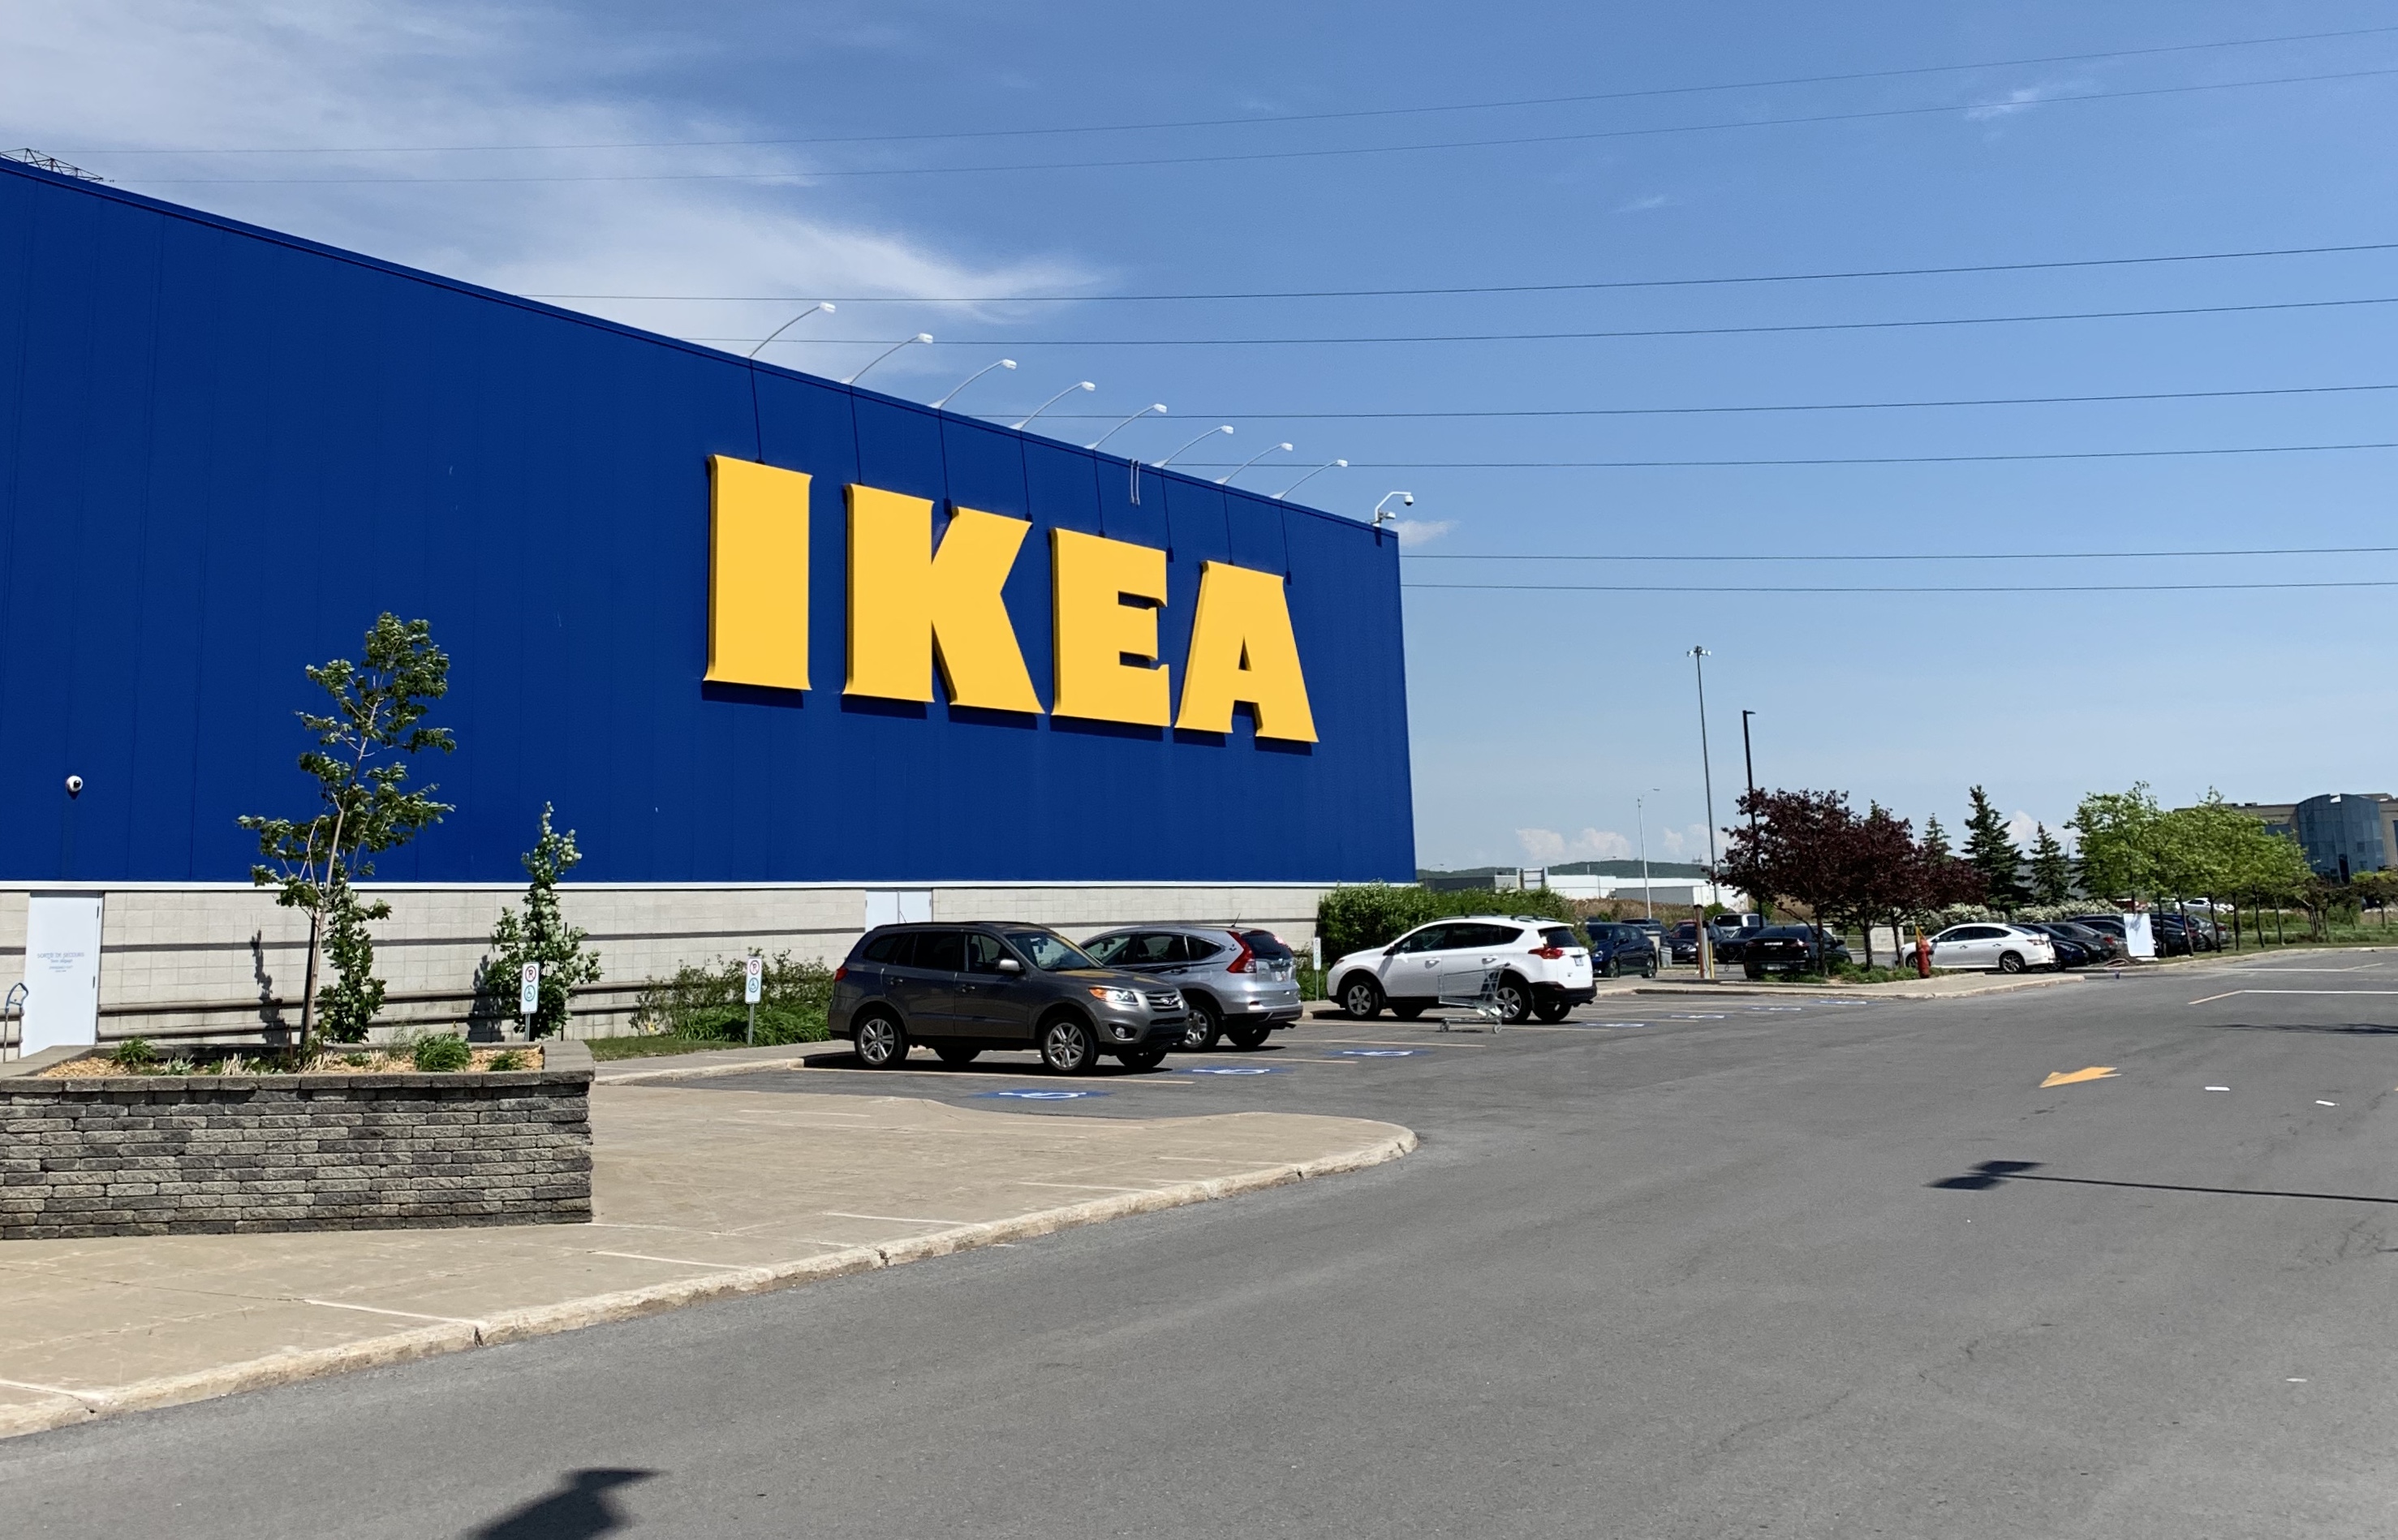 IKEA expects supply chain disruptions into 2022 as it fights